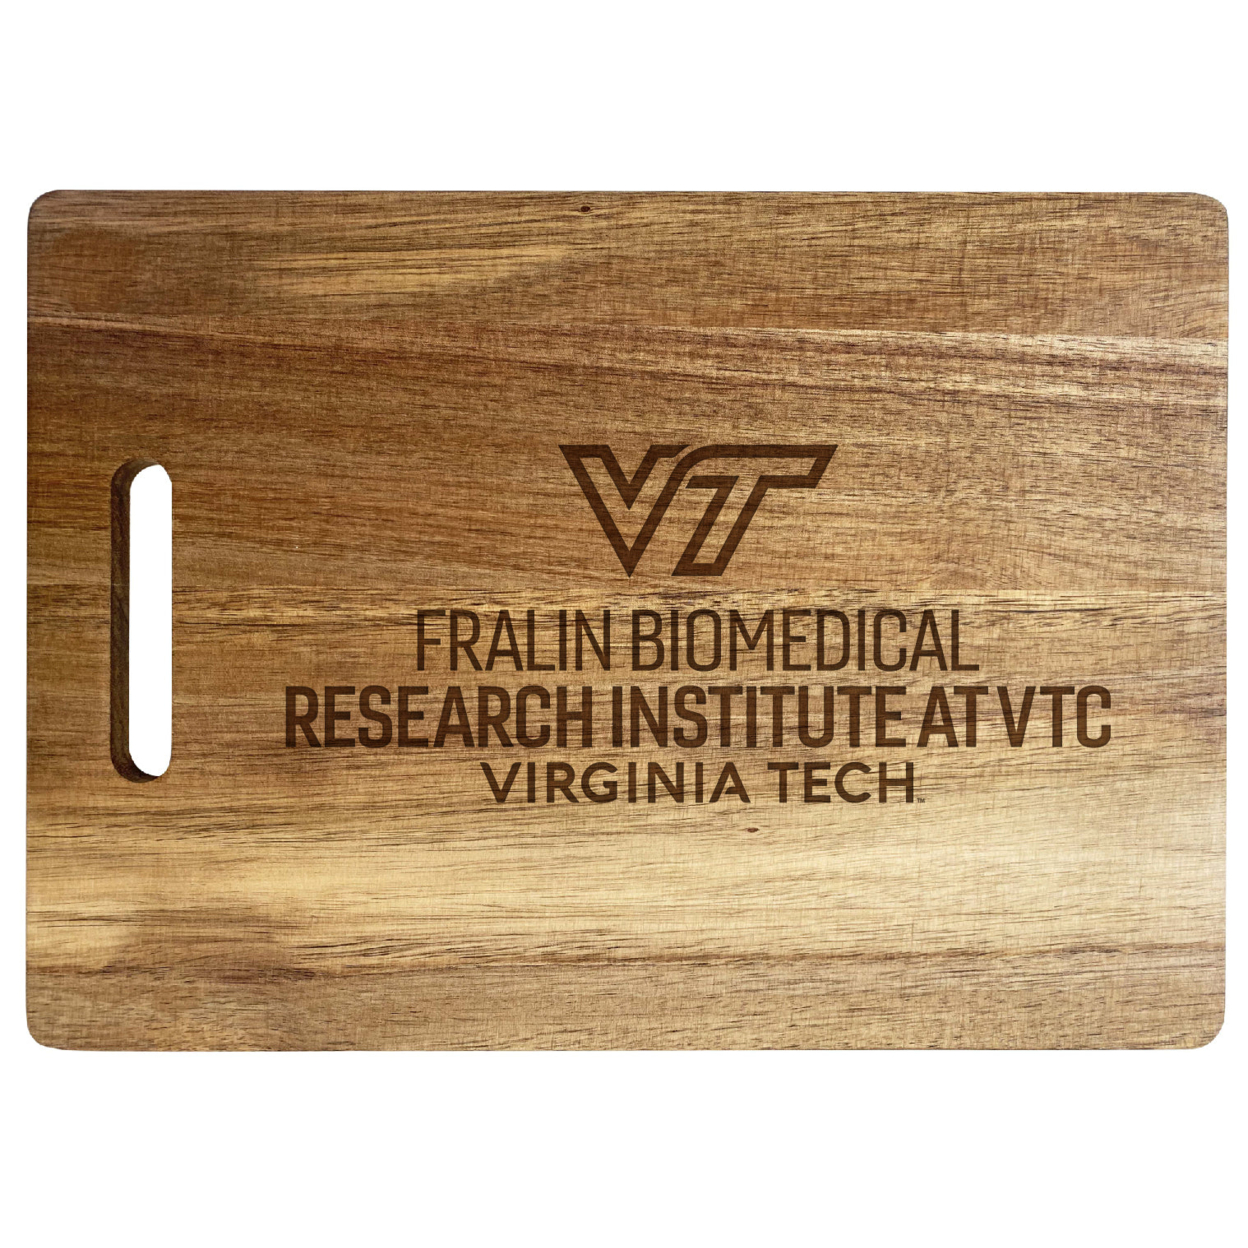 Virginia Tech Fralin Biomedical Research Institute Engraved Wooden Cutting Board 10 X 14 Acacia Wood - Large Engraving